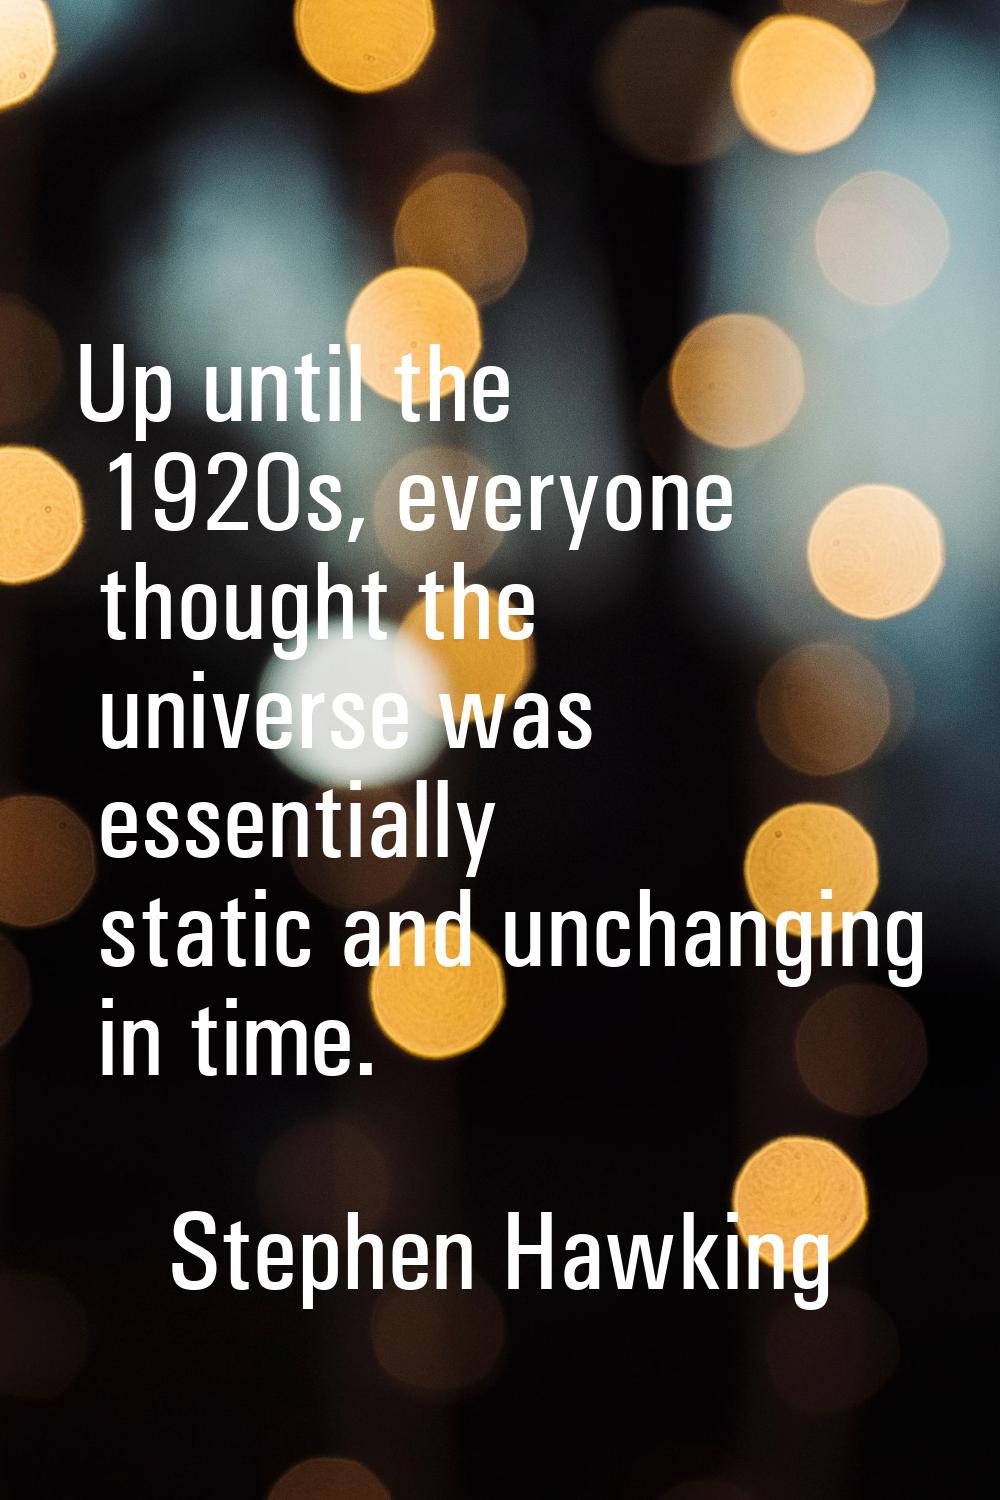 Up until the 1920s, everyone thought the universe was essentially static and unchanging in time.